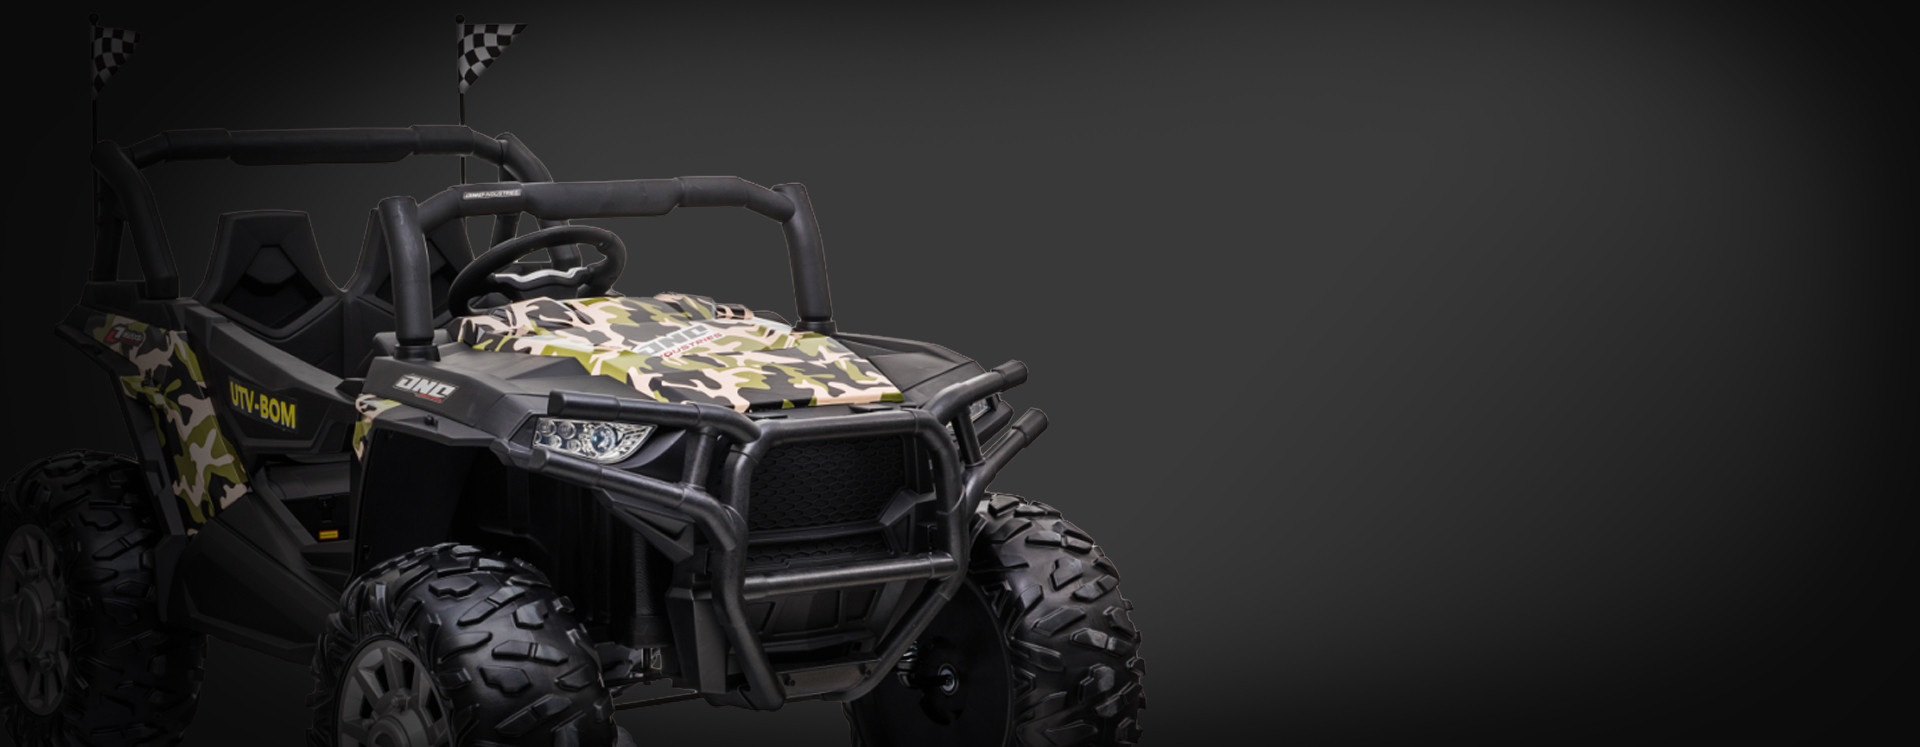 Xtreme BIG 24v Ride on Buggy Off Road UTV Jeep Painted Camouflage Green